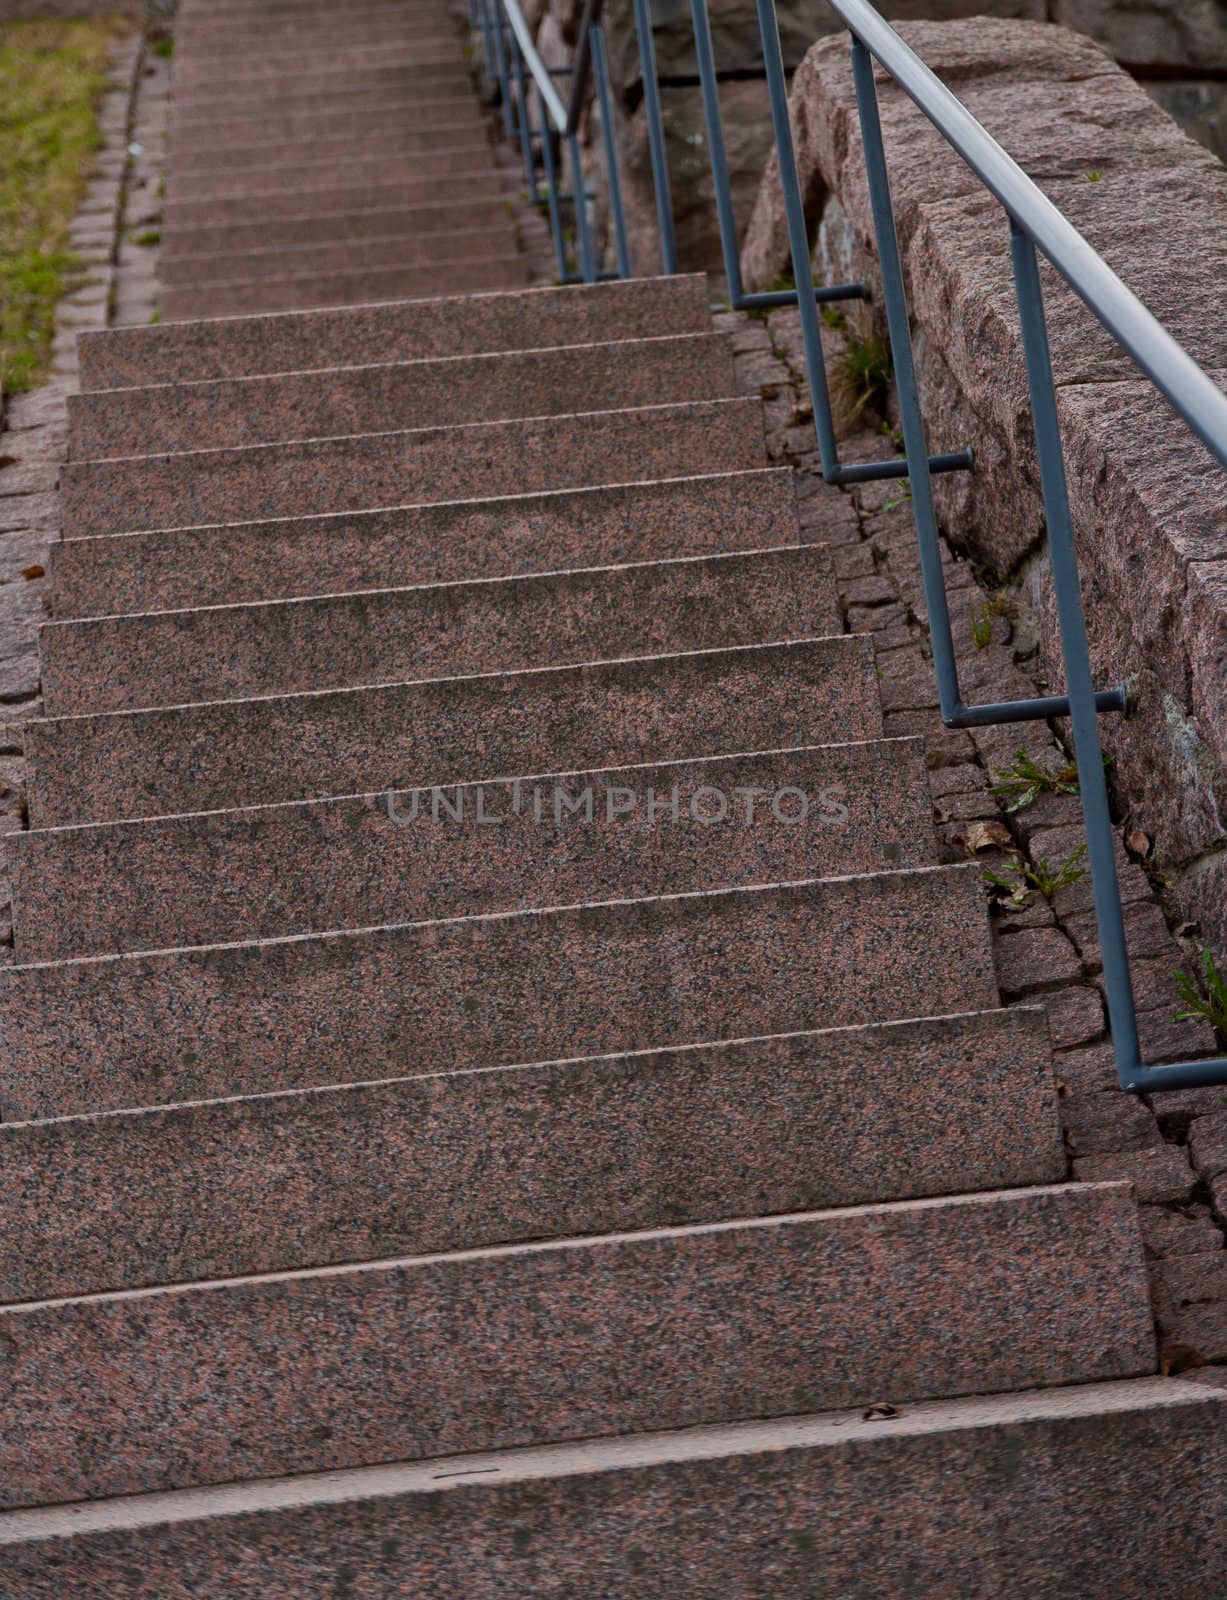 Rock stairs with a metallic rail